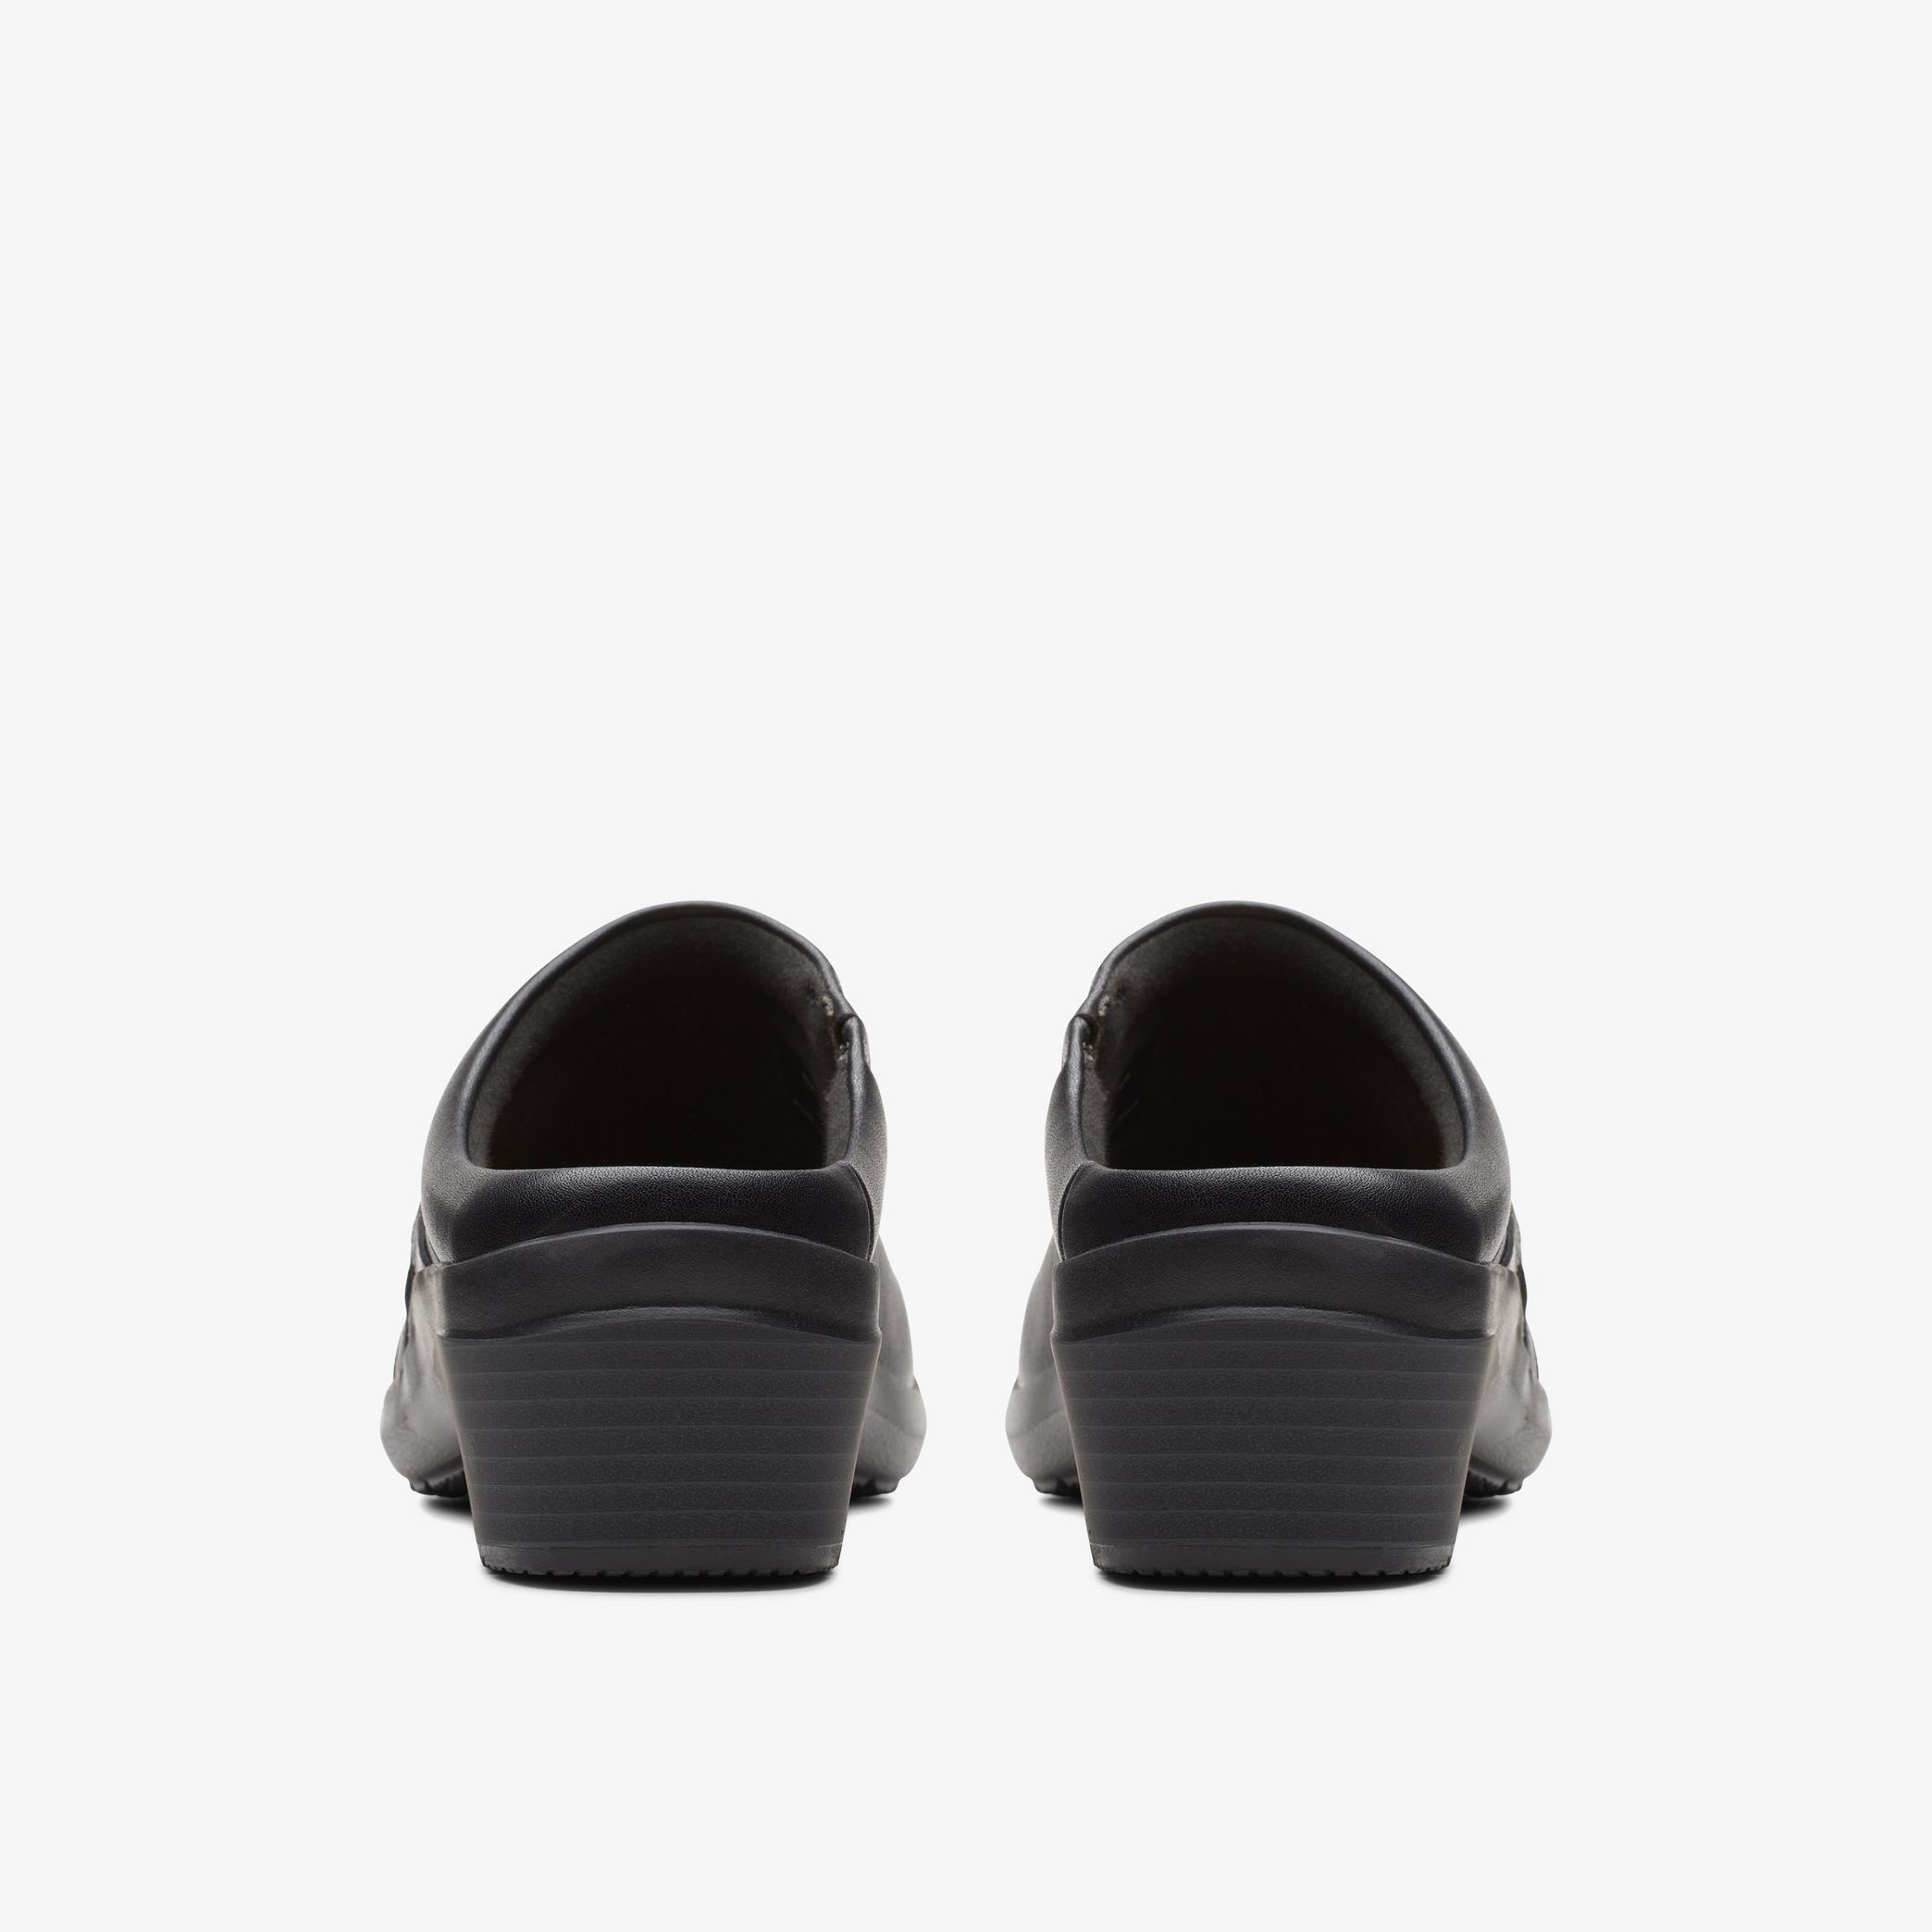 WOMENS Angie Mist Black Leather Mules | Clarks US